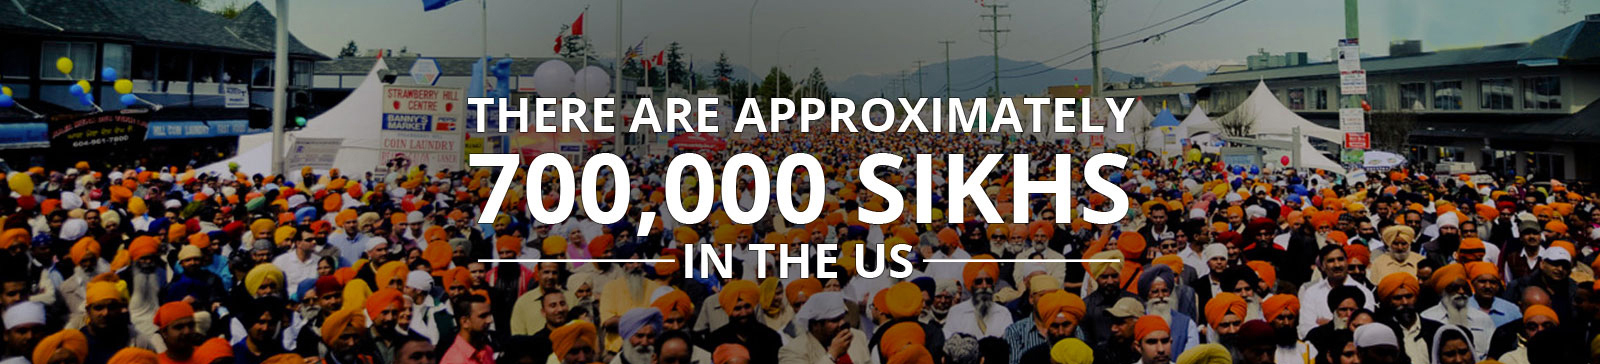 welcome to I AM A SIKH